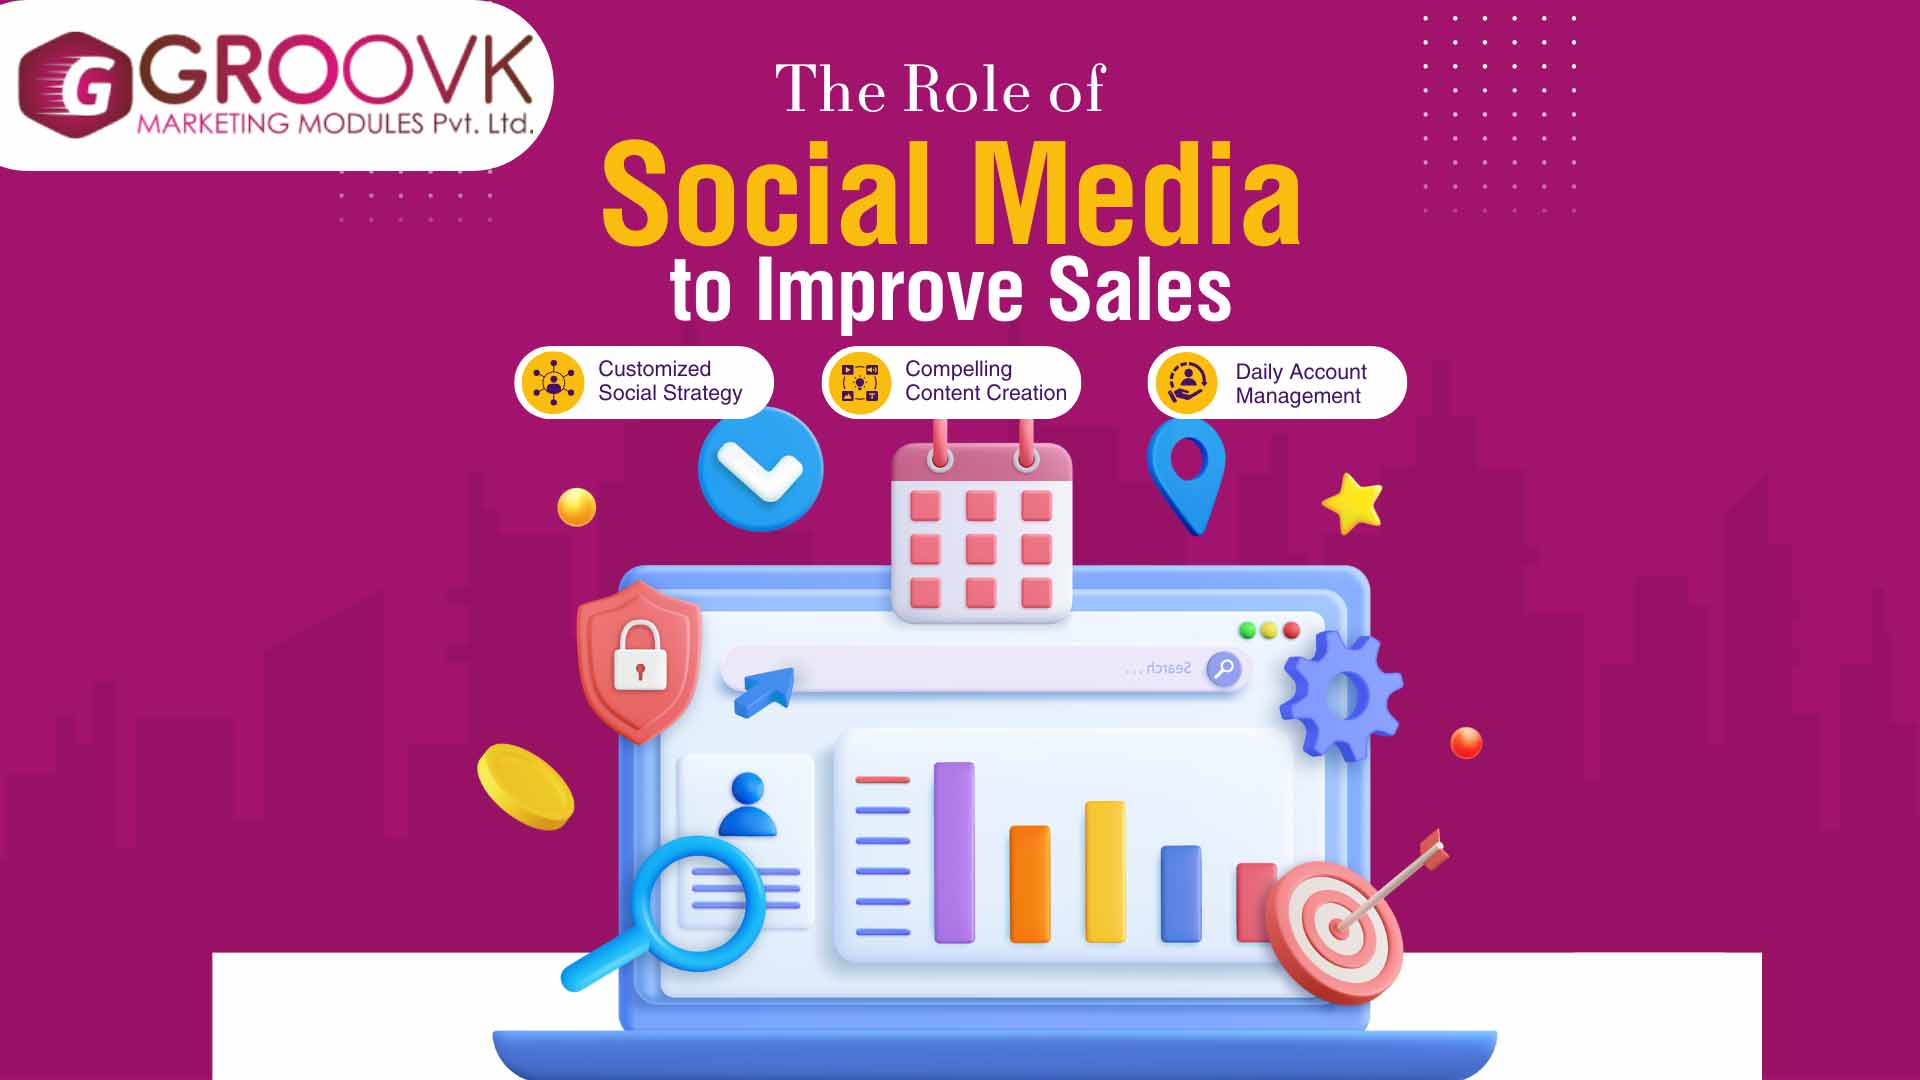 The Role of Social Media to Improve Sales